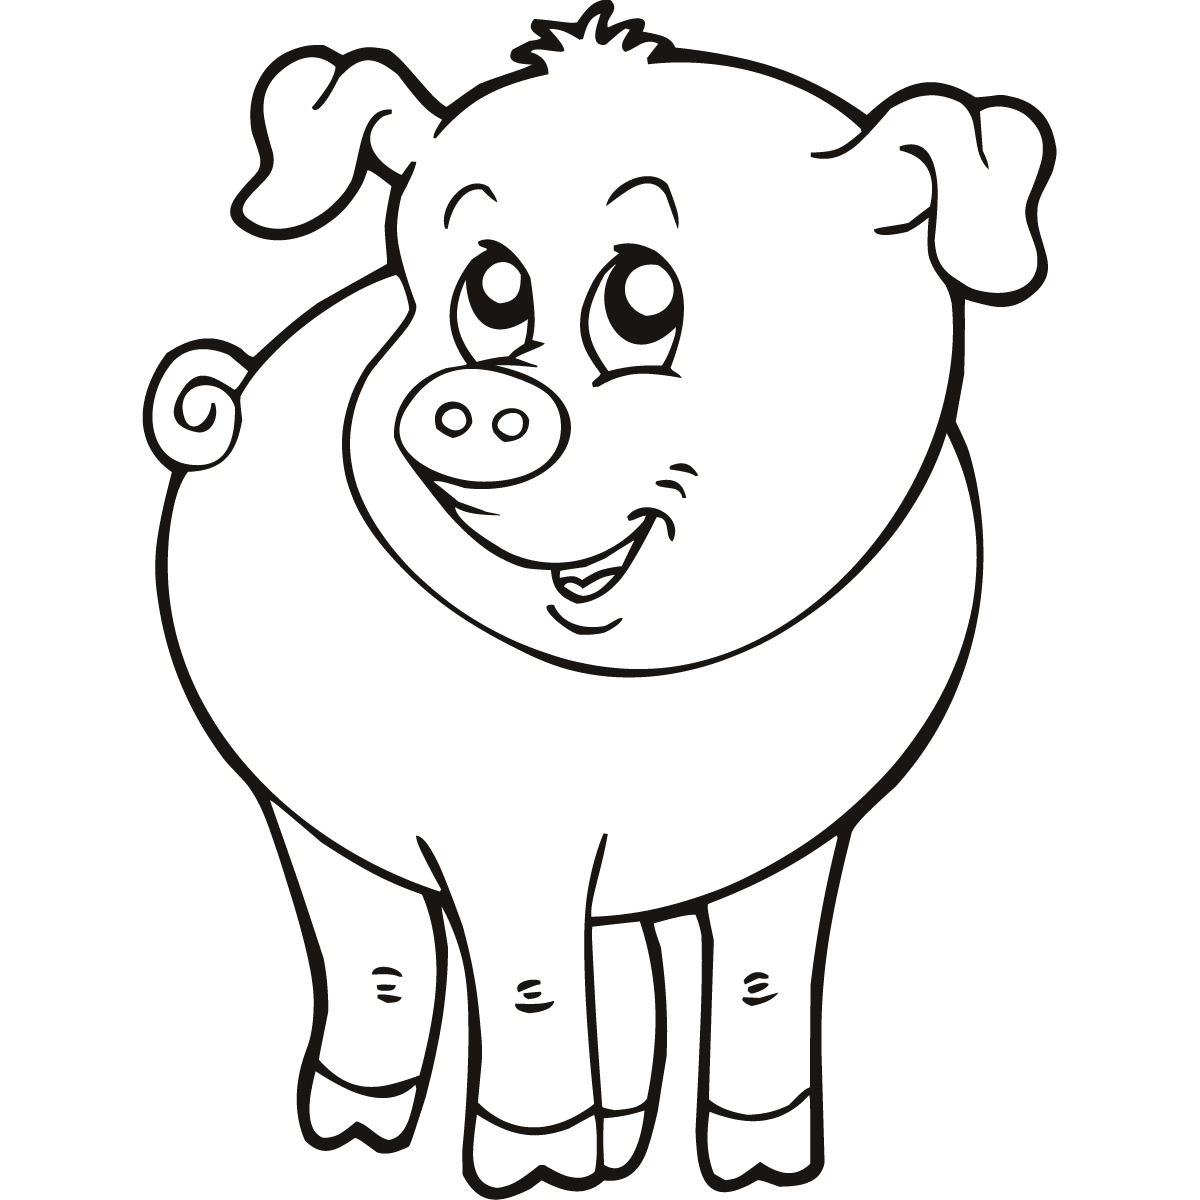 Farm animal coloring page - Coloring Pages  Pictures - IMAGIXS